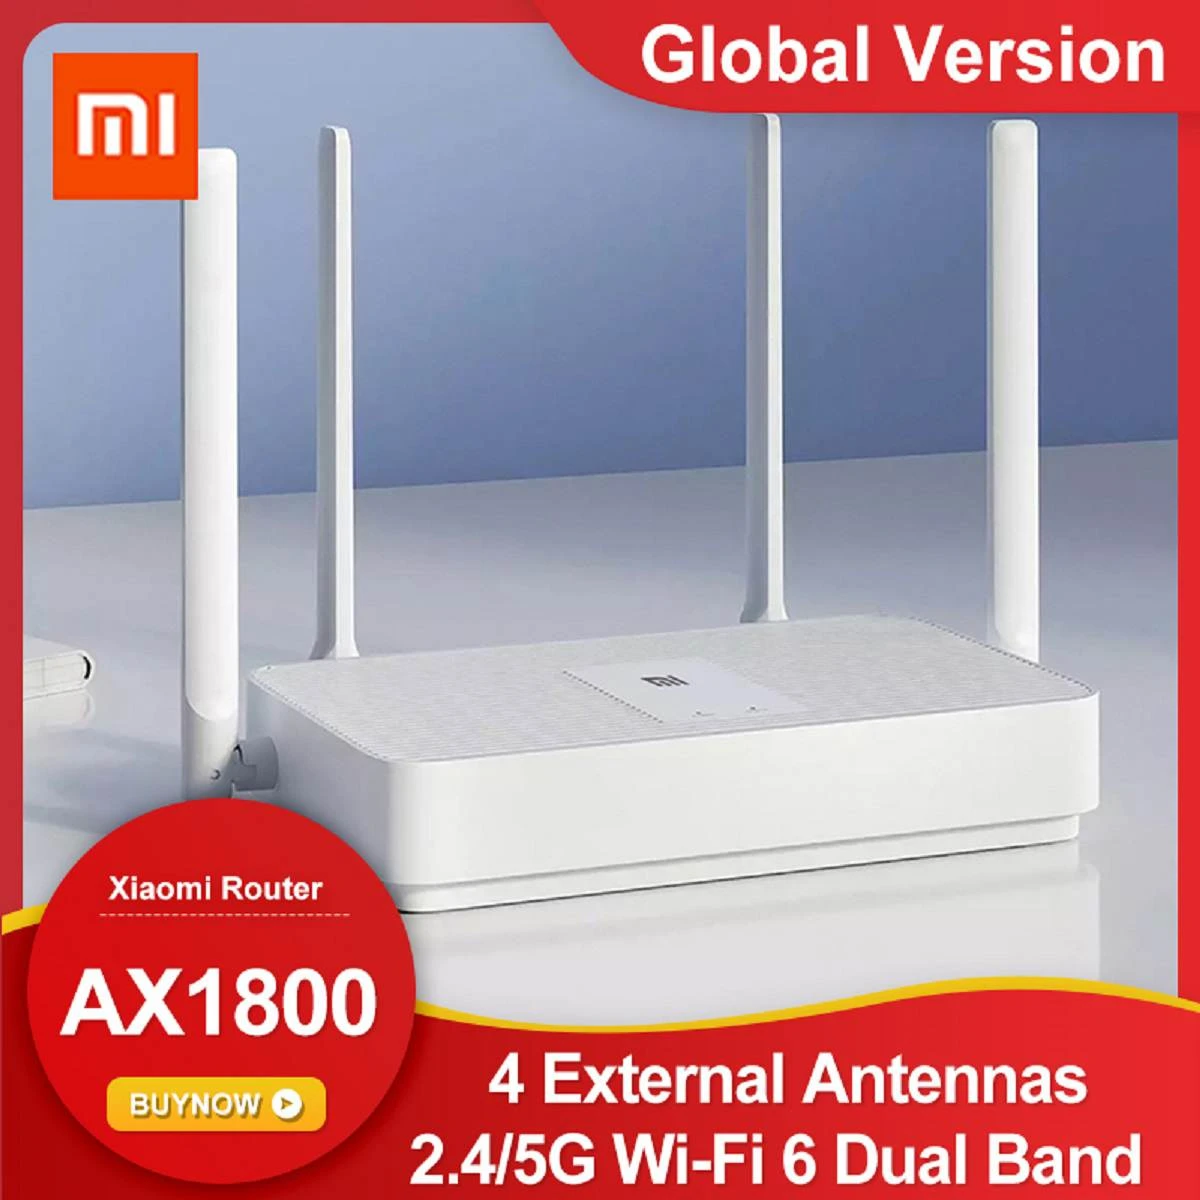 top rated wifi signal booster Global Version Xiaomi Router AX1800 Wi-Fi 6 Dual Band Wireless WiFi Router 5-Core Chip 4 External Antennas Signal Booster outdoor signal booster wifi